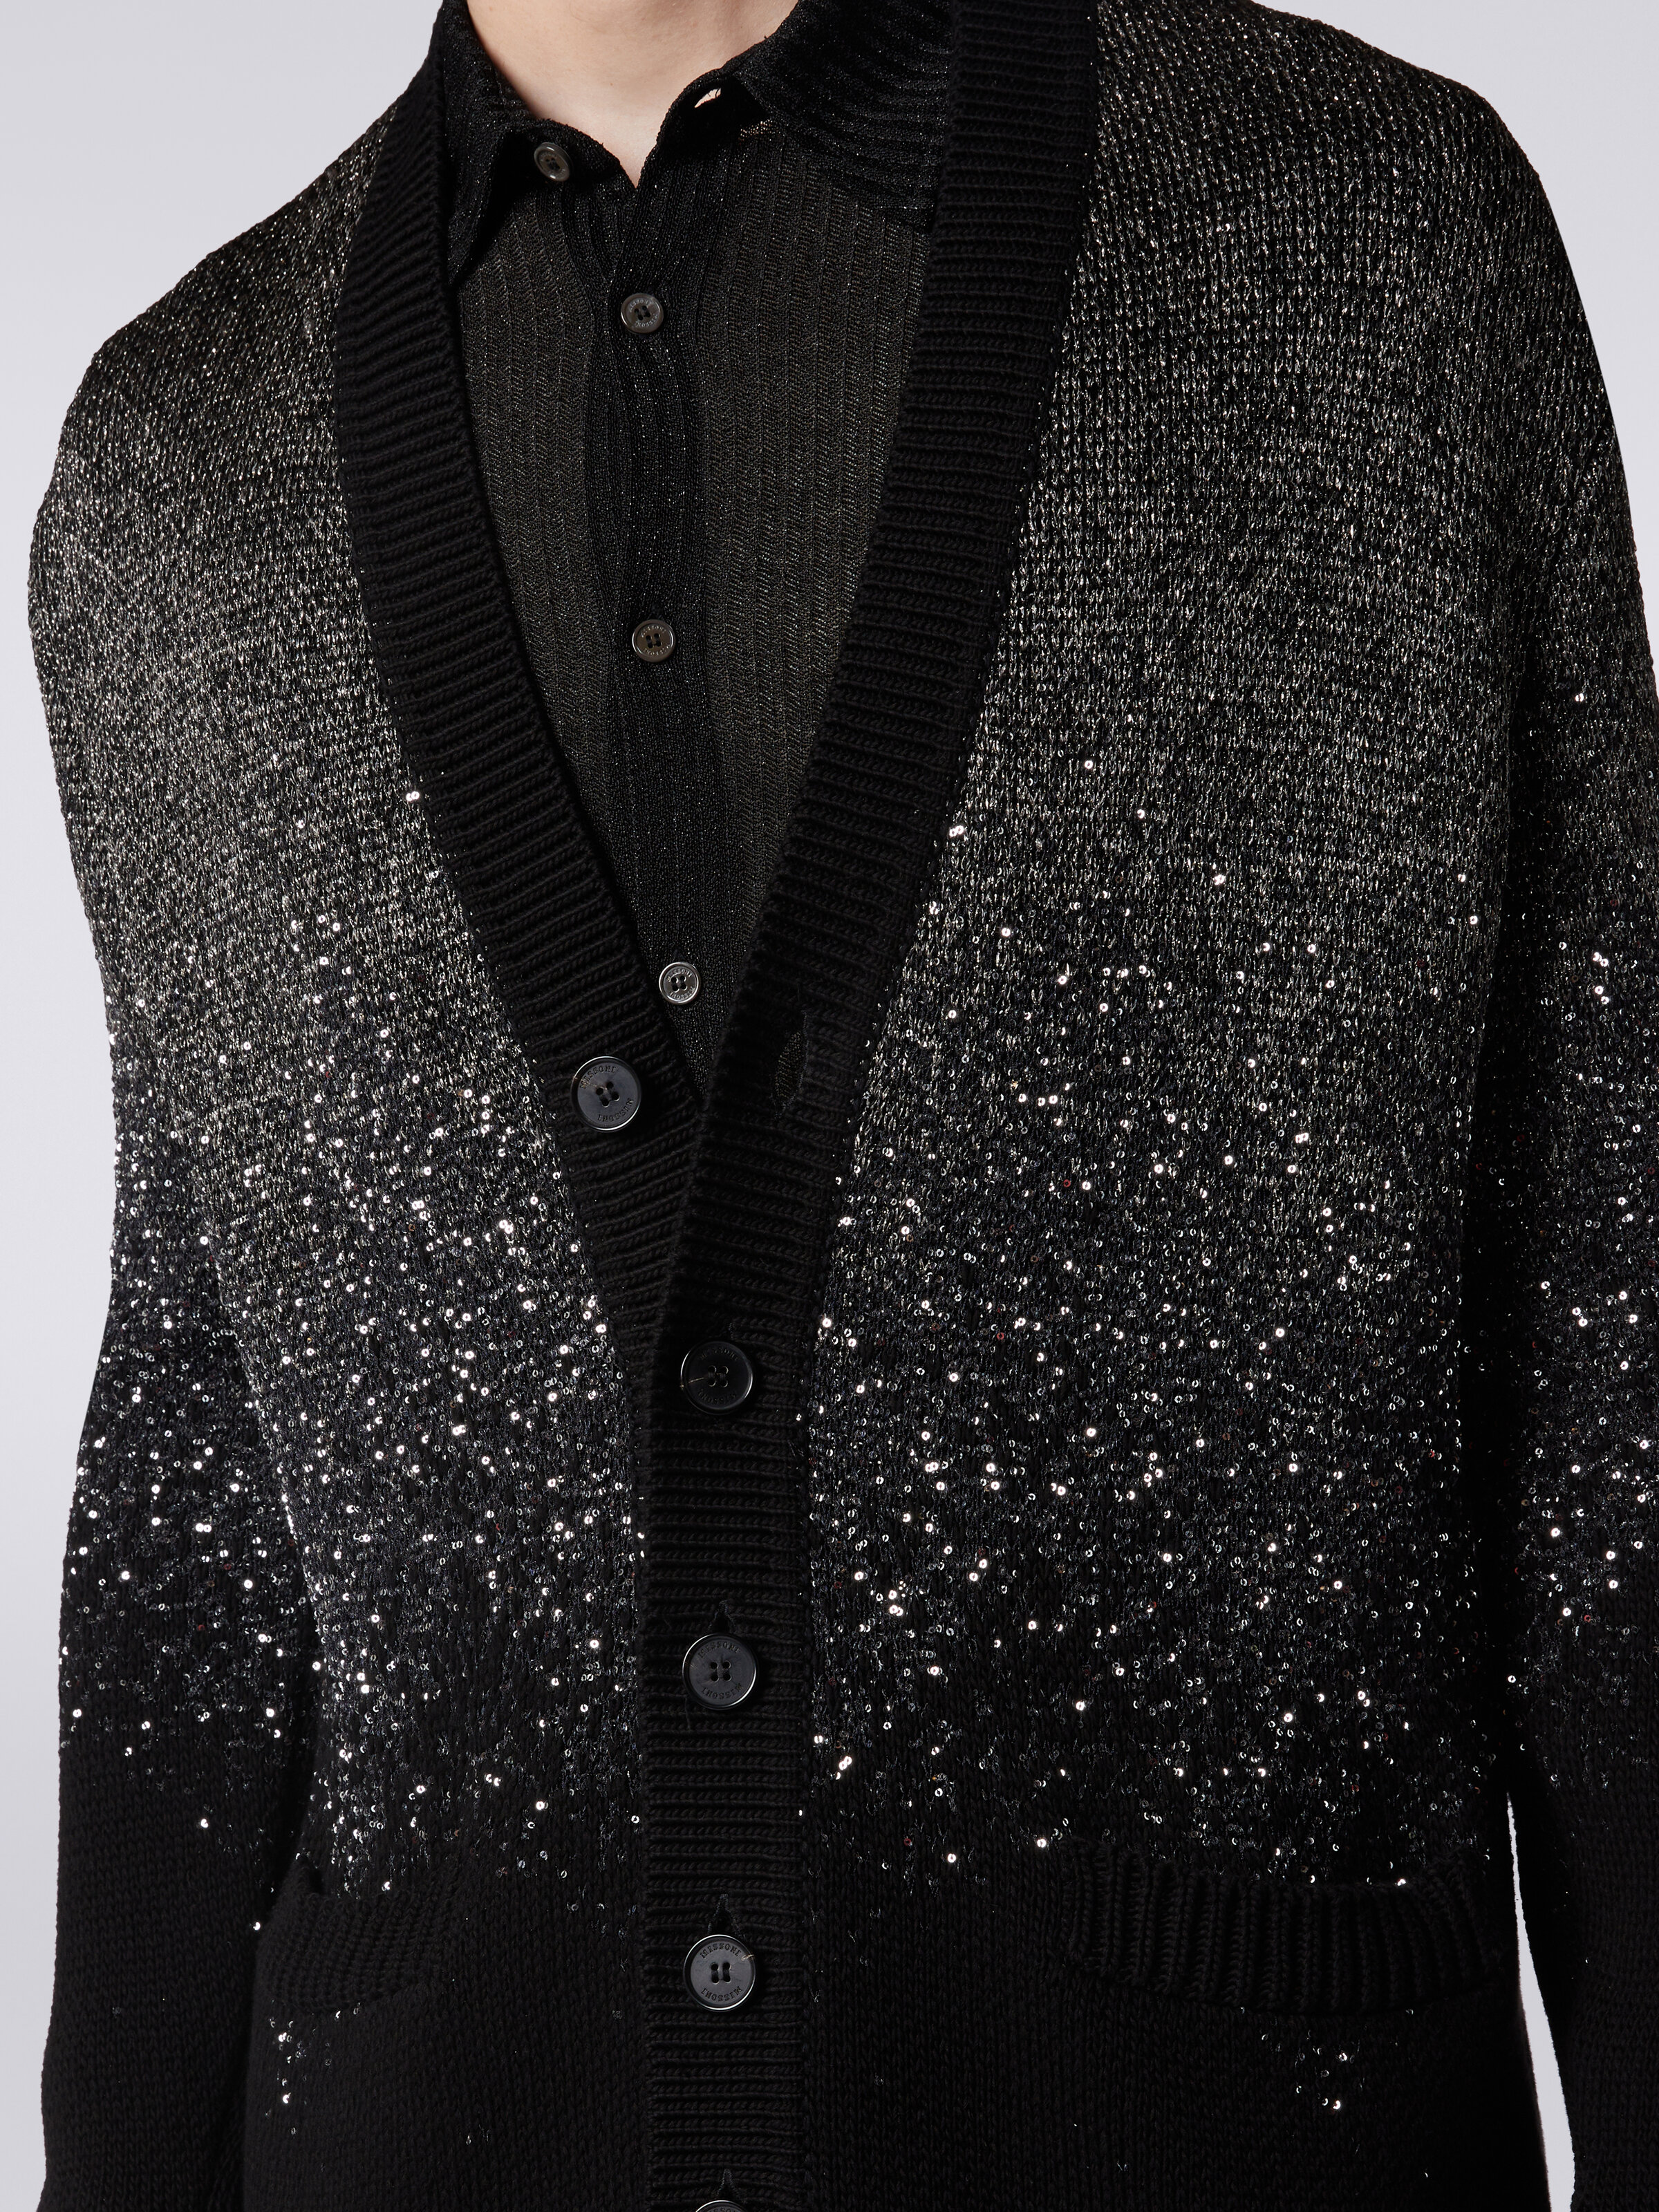 Cardigan in cotton blend with lurex and sequins, Black    - 4